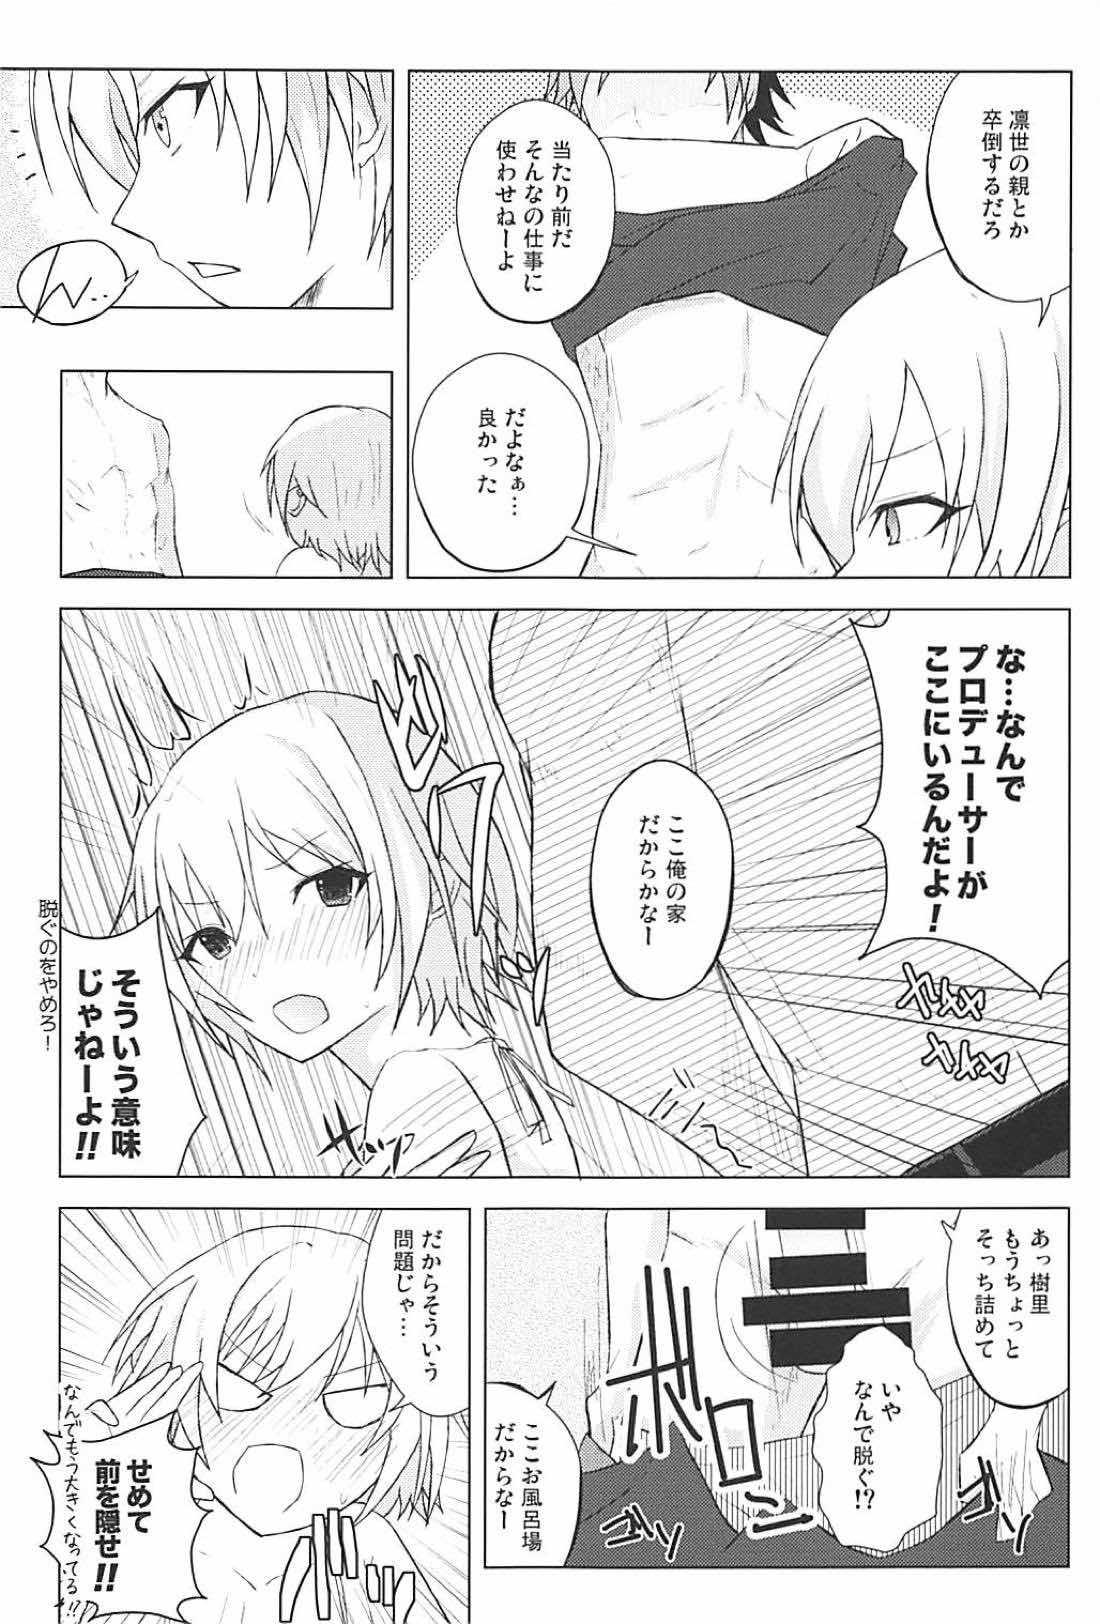 Naked Houkago no Junjou Otome - The idolmaster Tied - Page 9